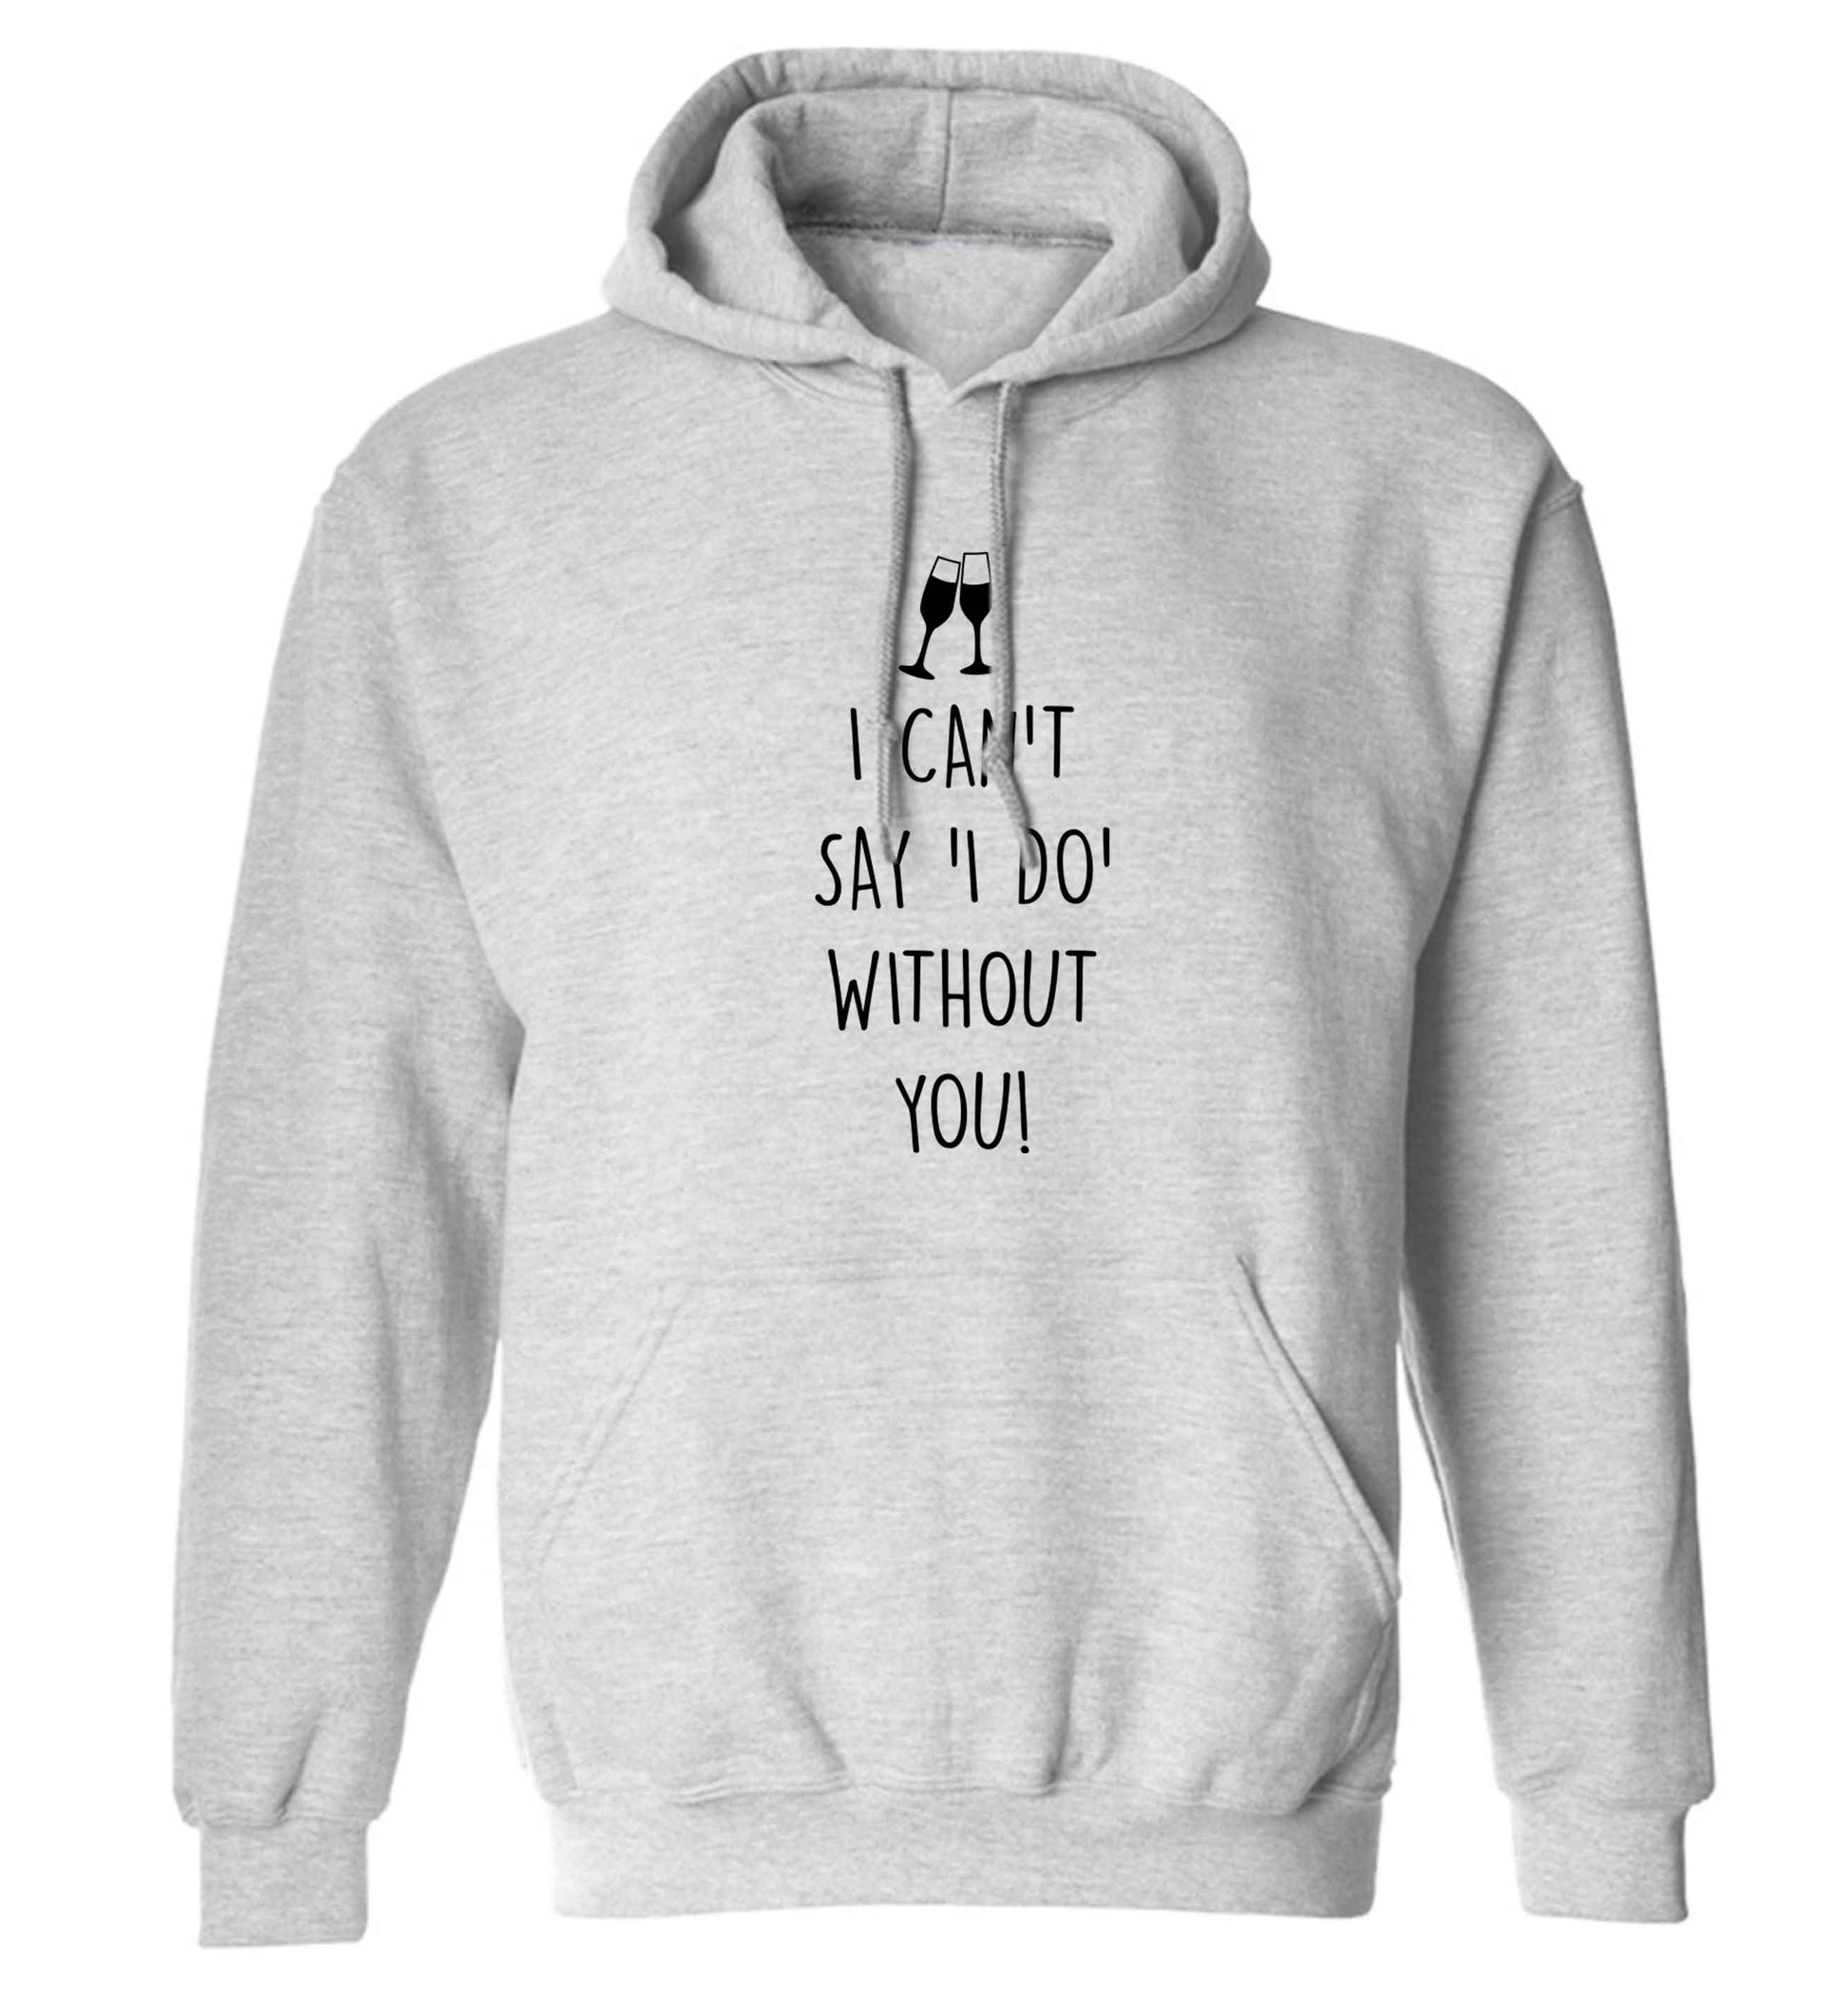 I can't say 'I do' without you! adults unisex grey hoodie 2XL